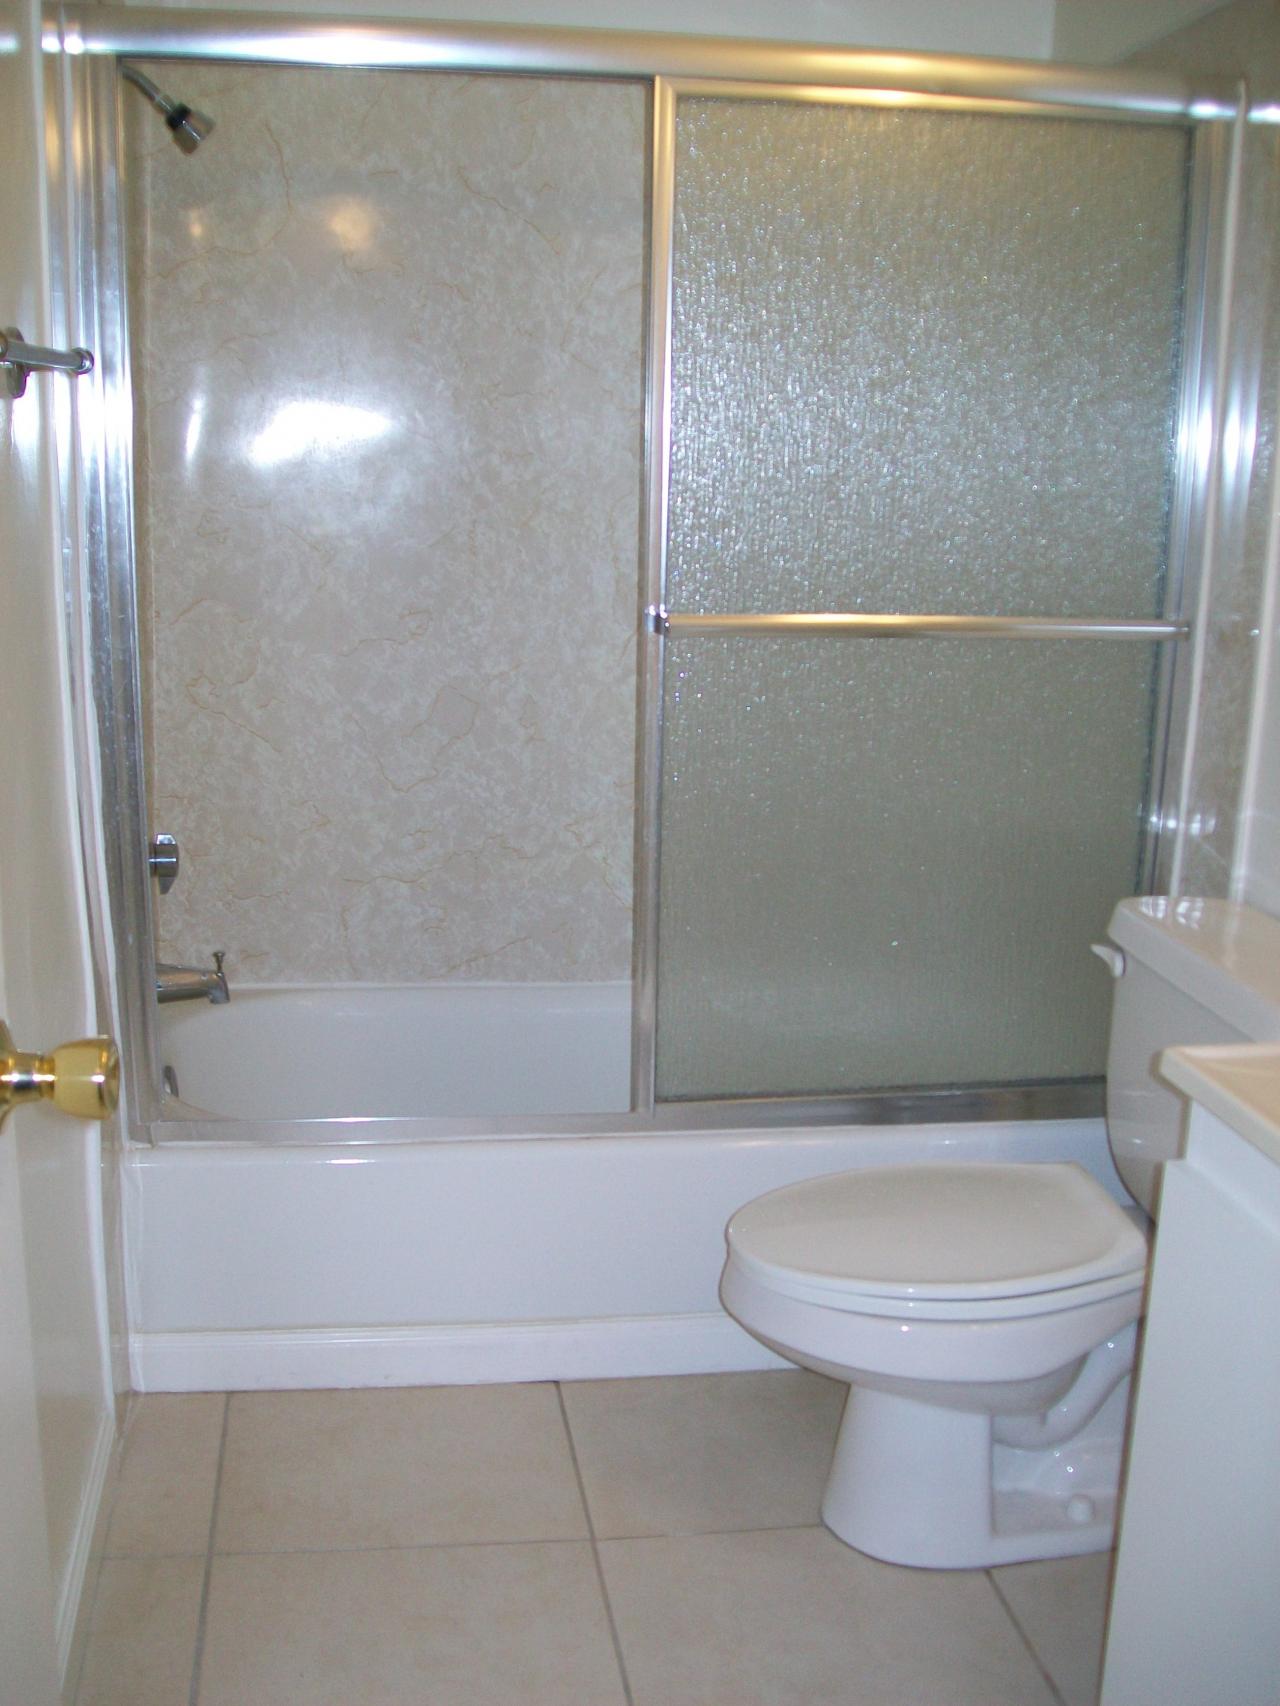 Photo of Kingsbury Villas Apartments - a view of an apartment interior -bathroom overall view